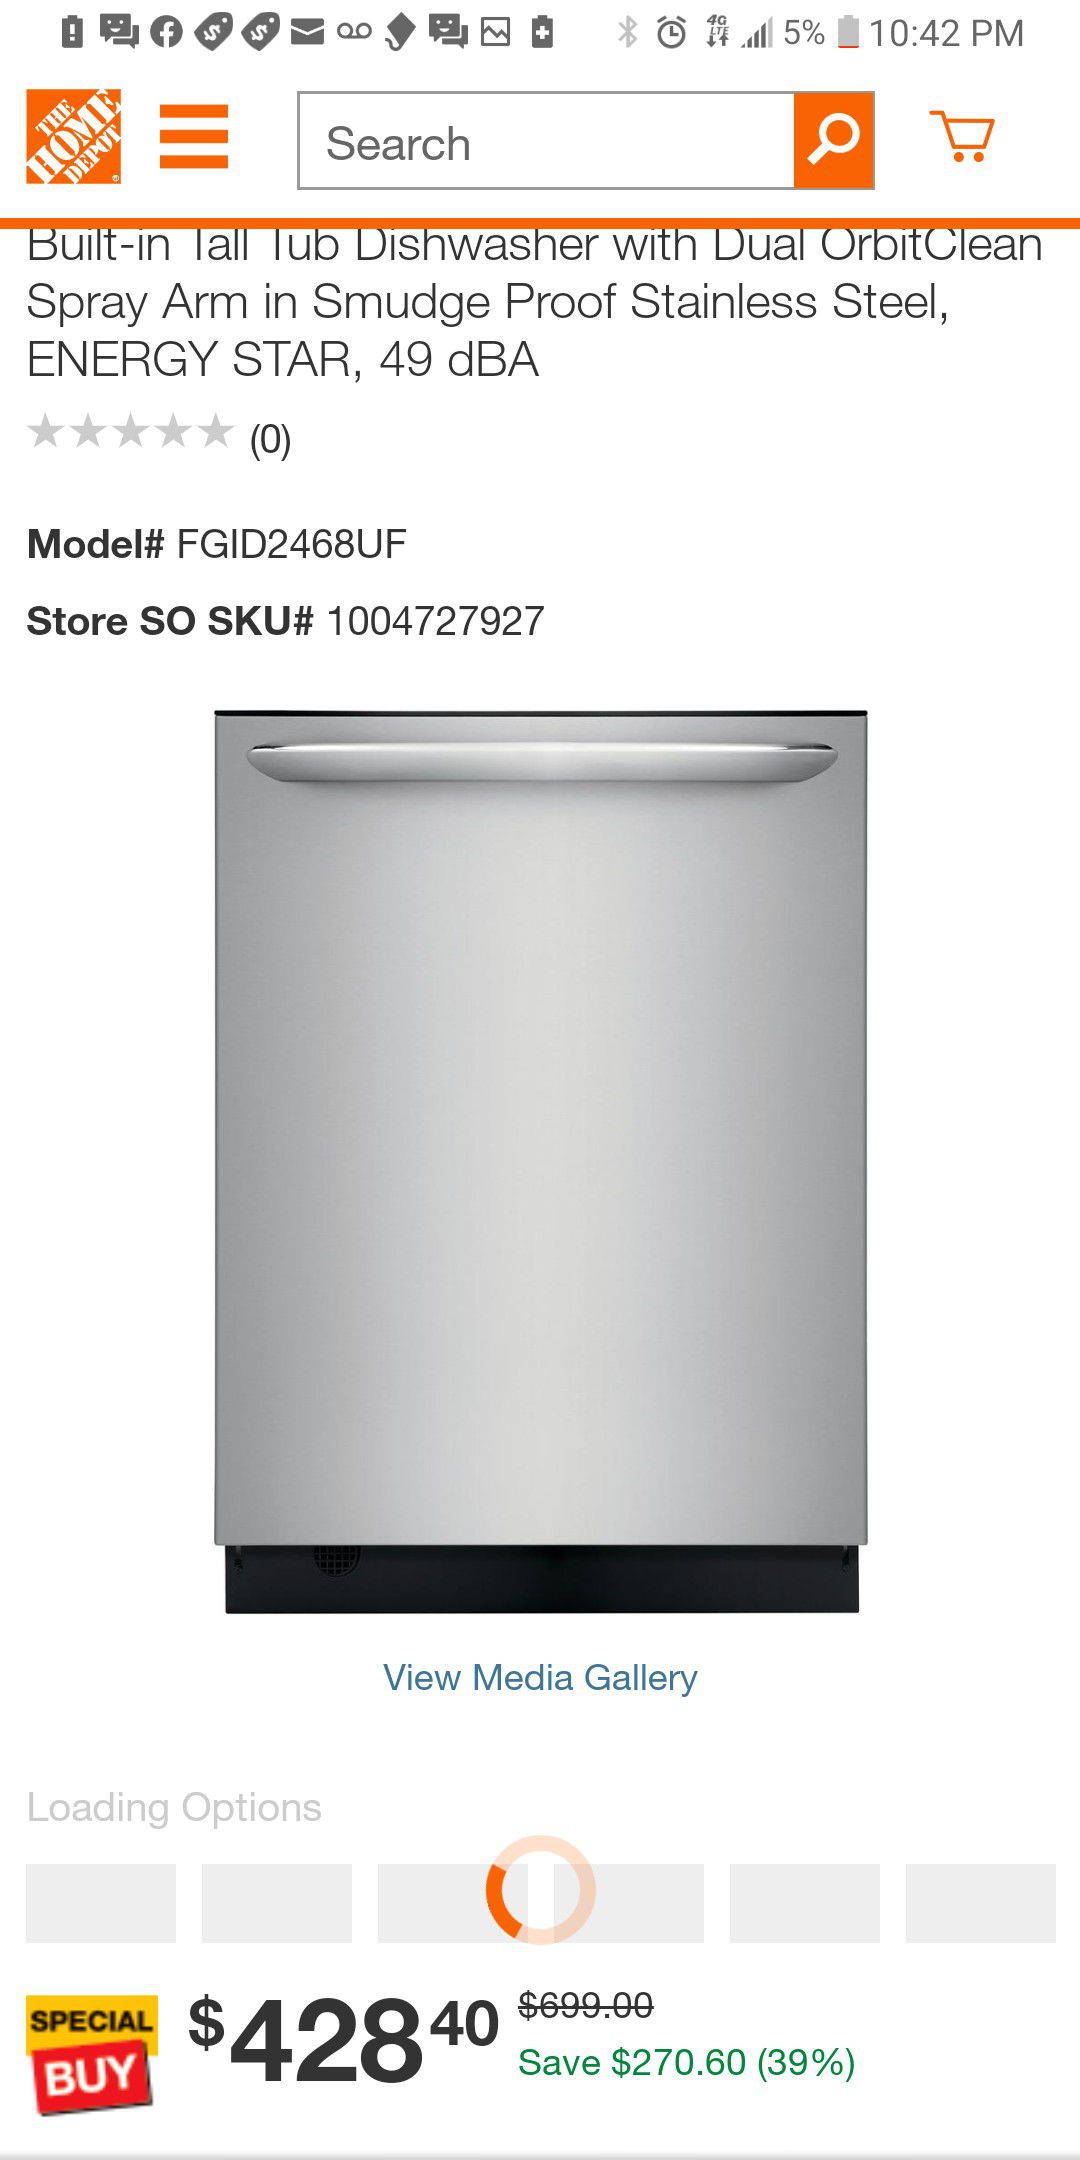 Fridaire gallery stainless steel dishwasher